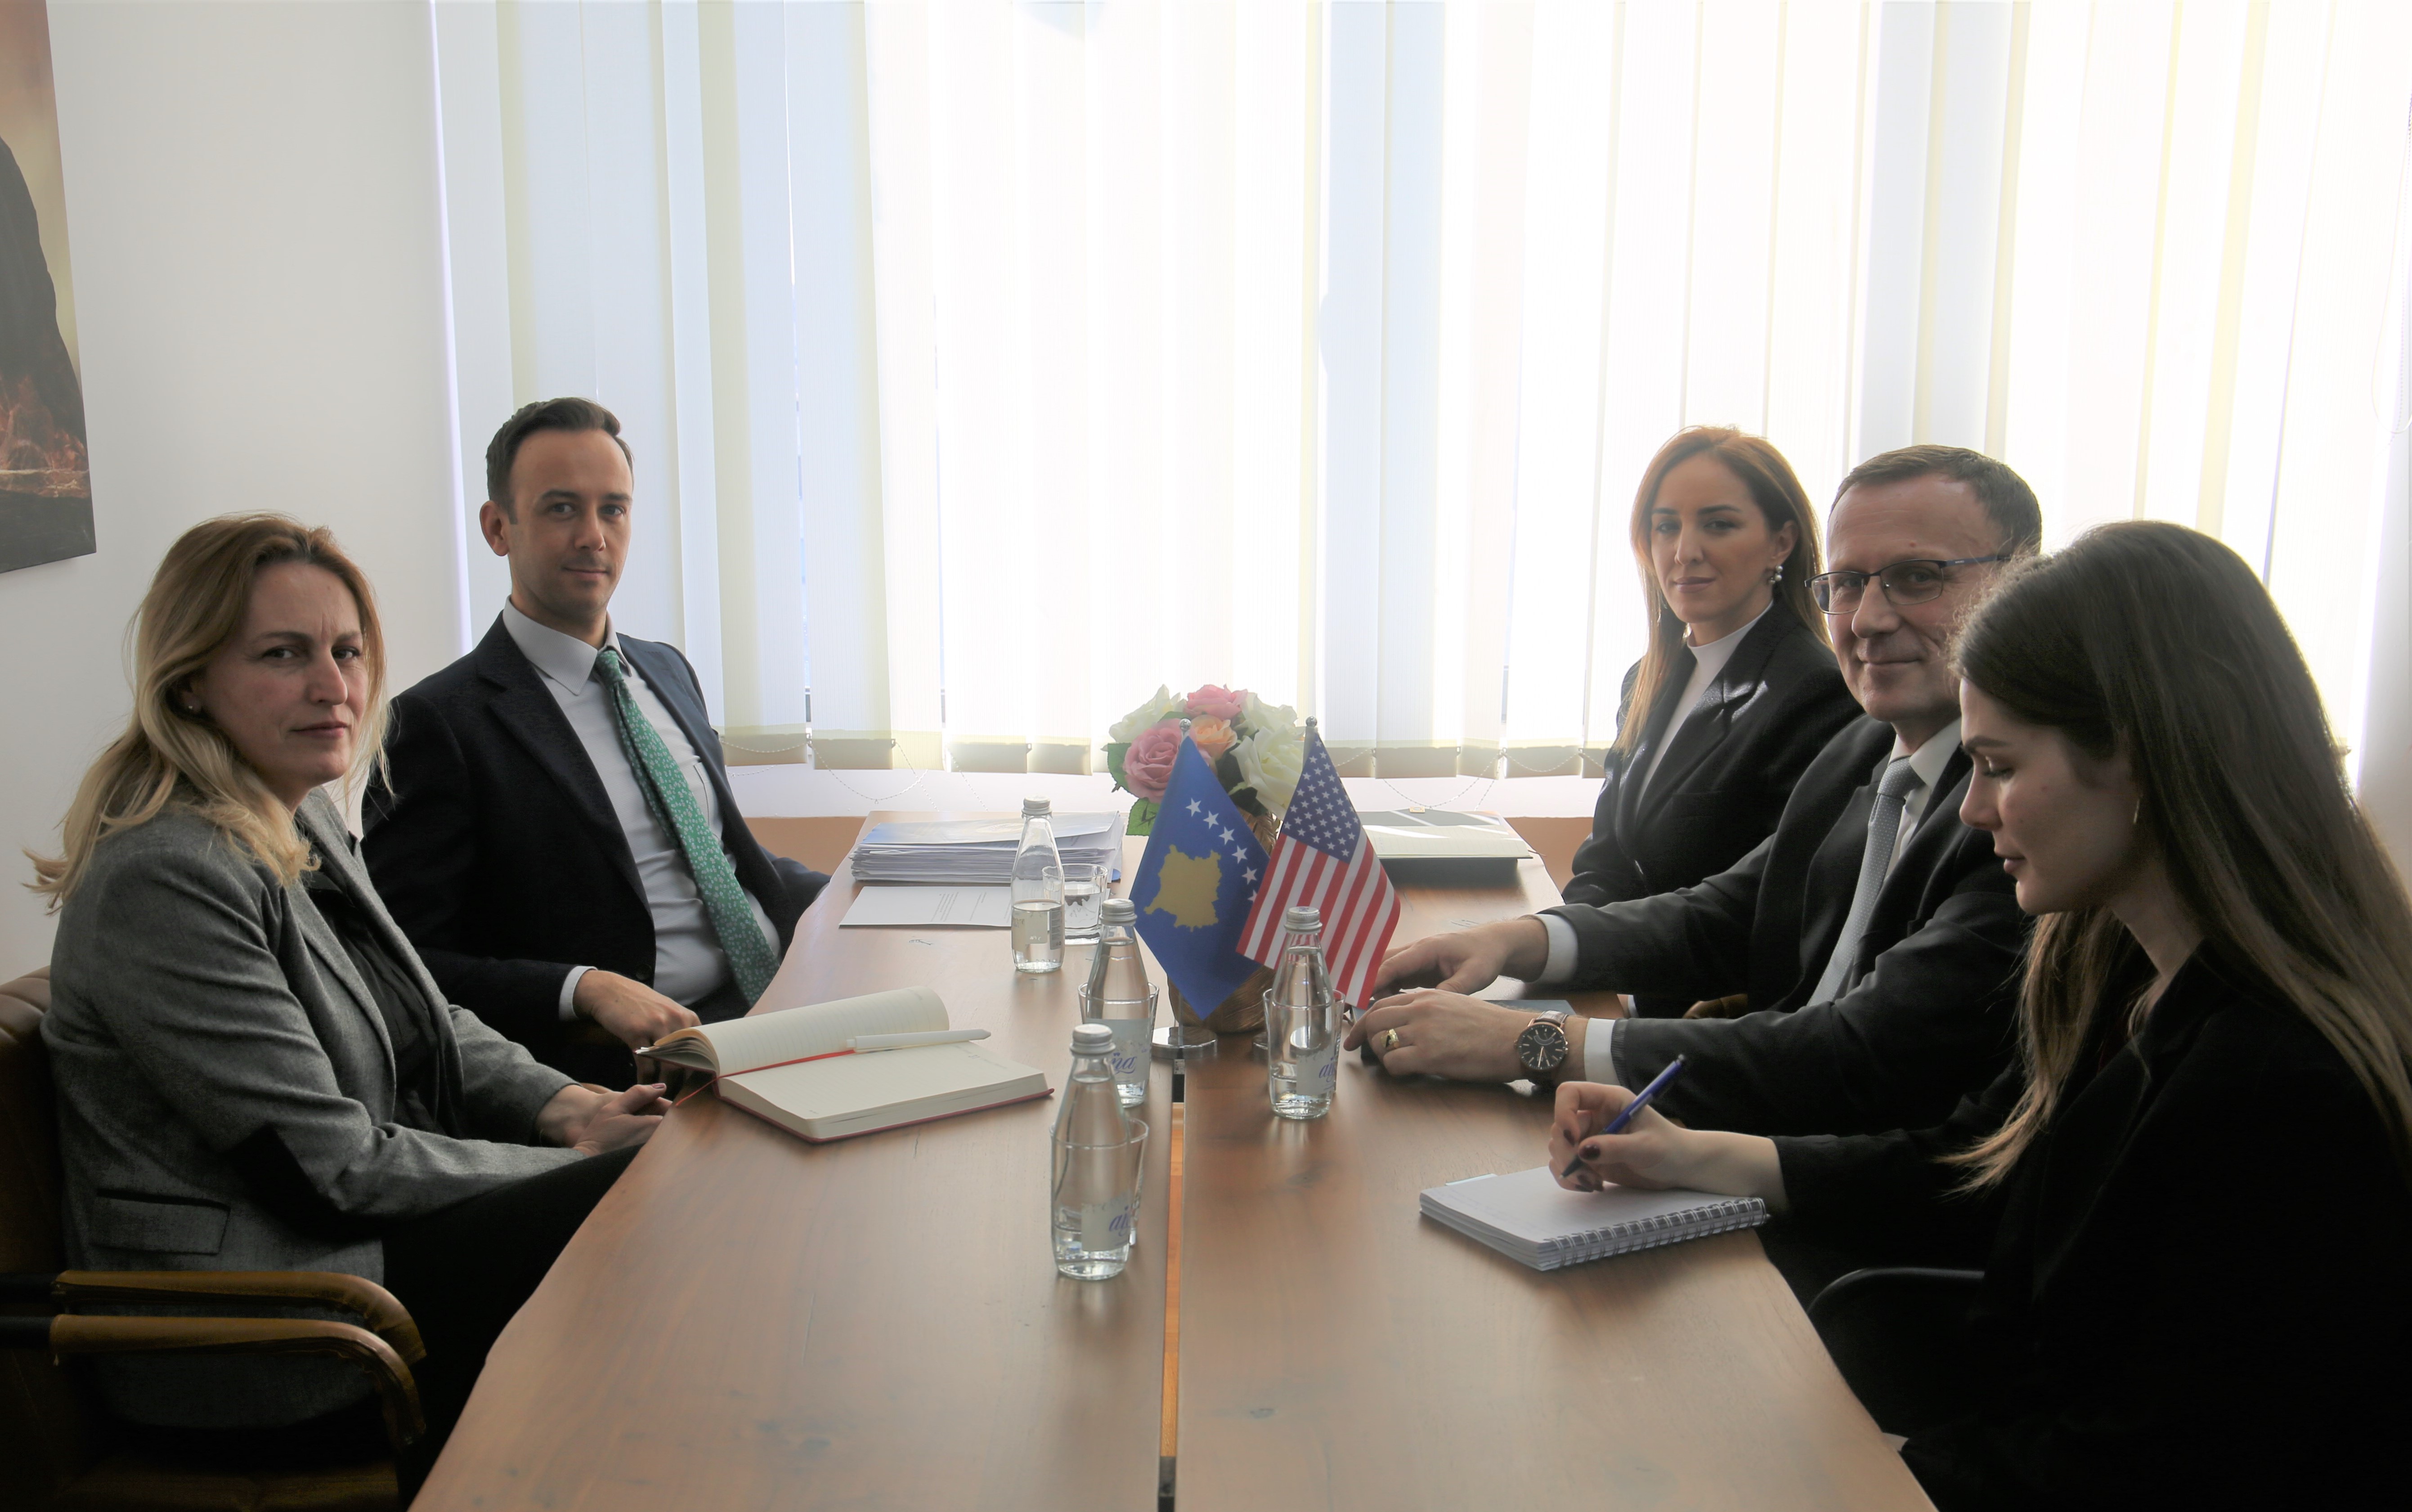 Chairman Hajdaraj hosted the representatives of the American Embassy in an introductory meeting